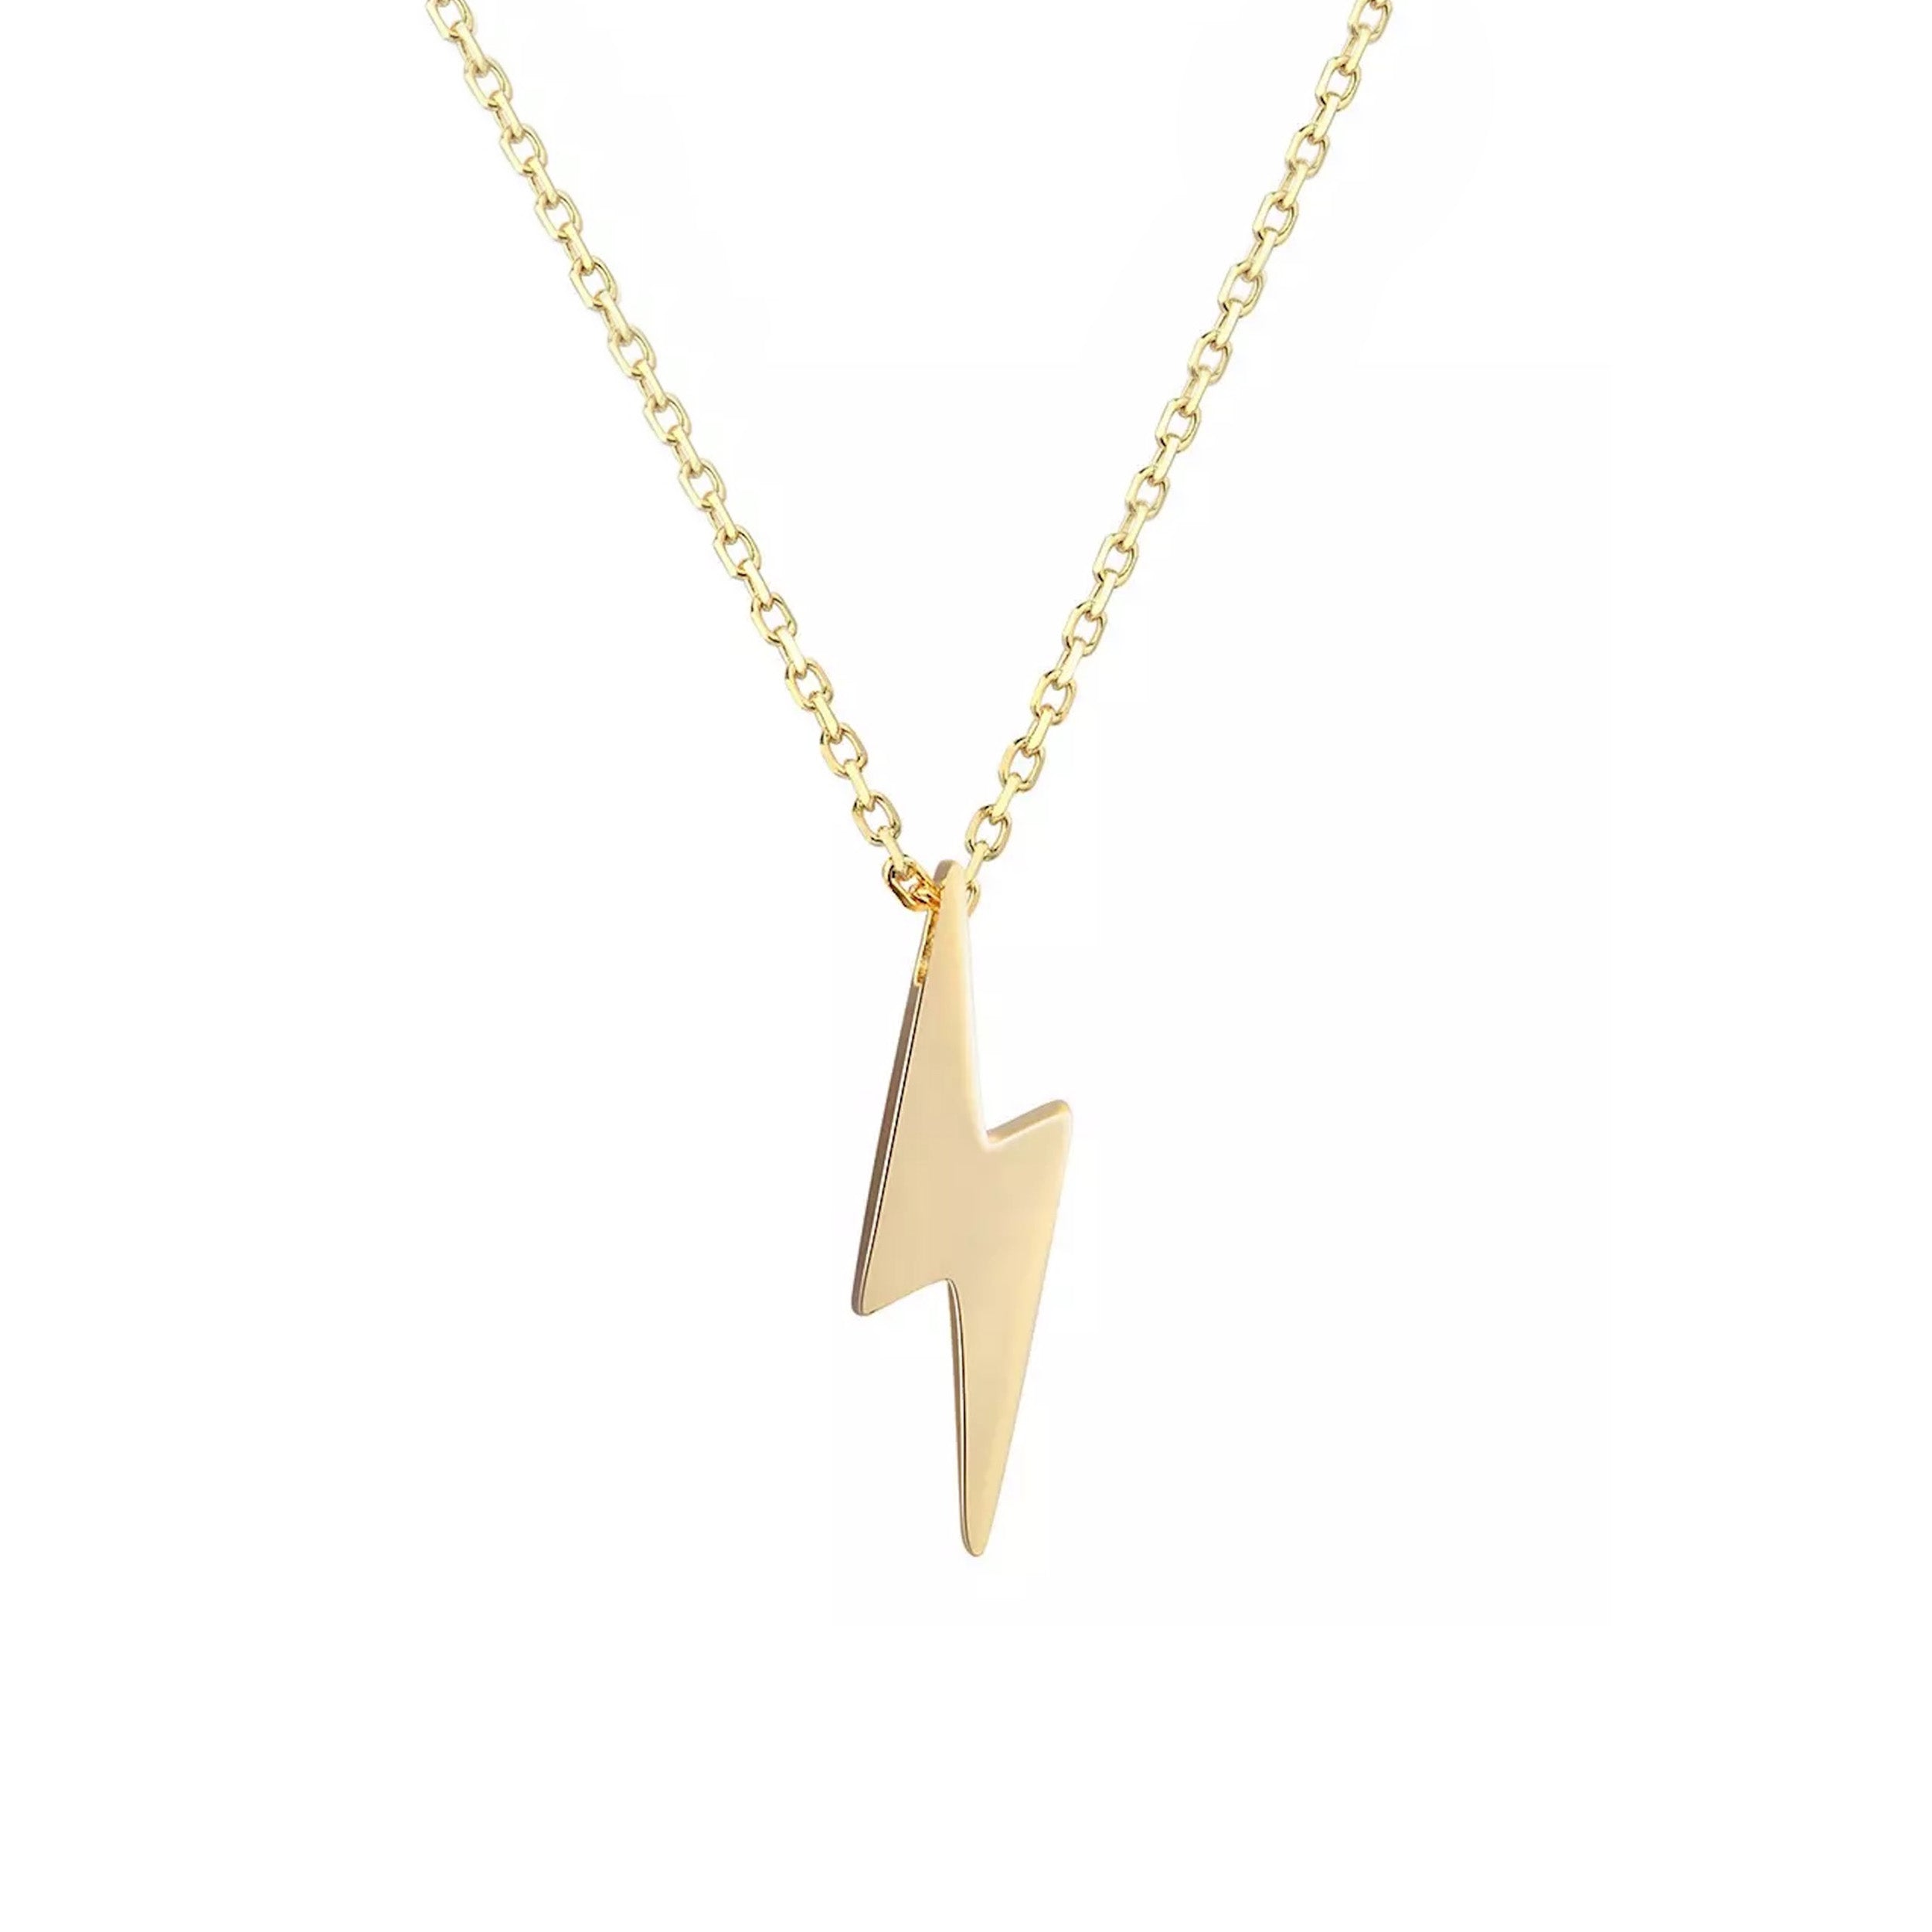 Bowie bolt 18K Gold plated sterling silver necklace